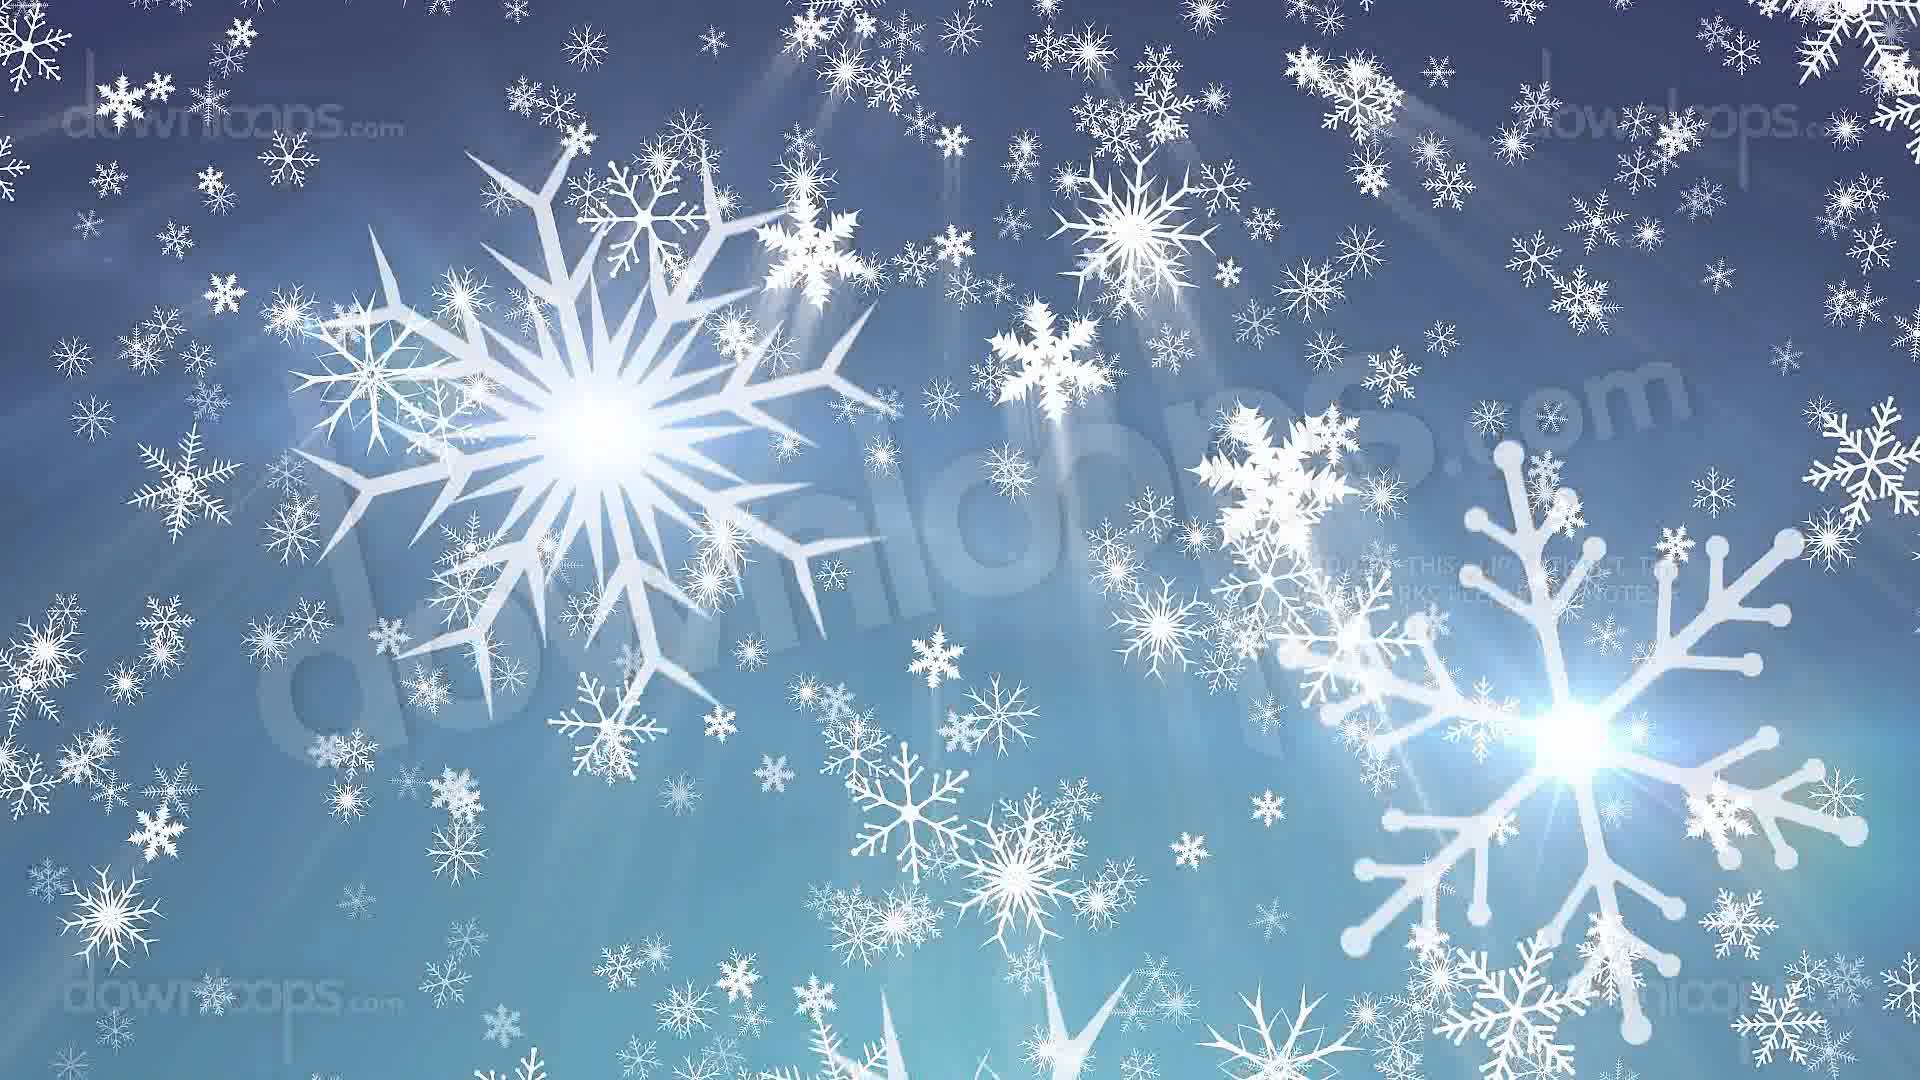 how can i find free anumaited snowflakes for os x screensaver